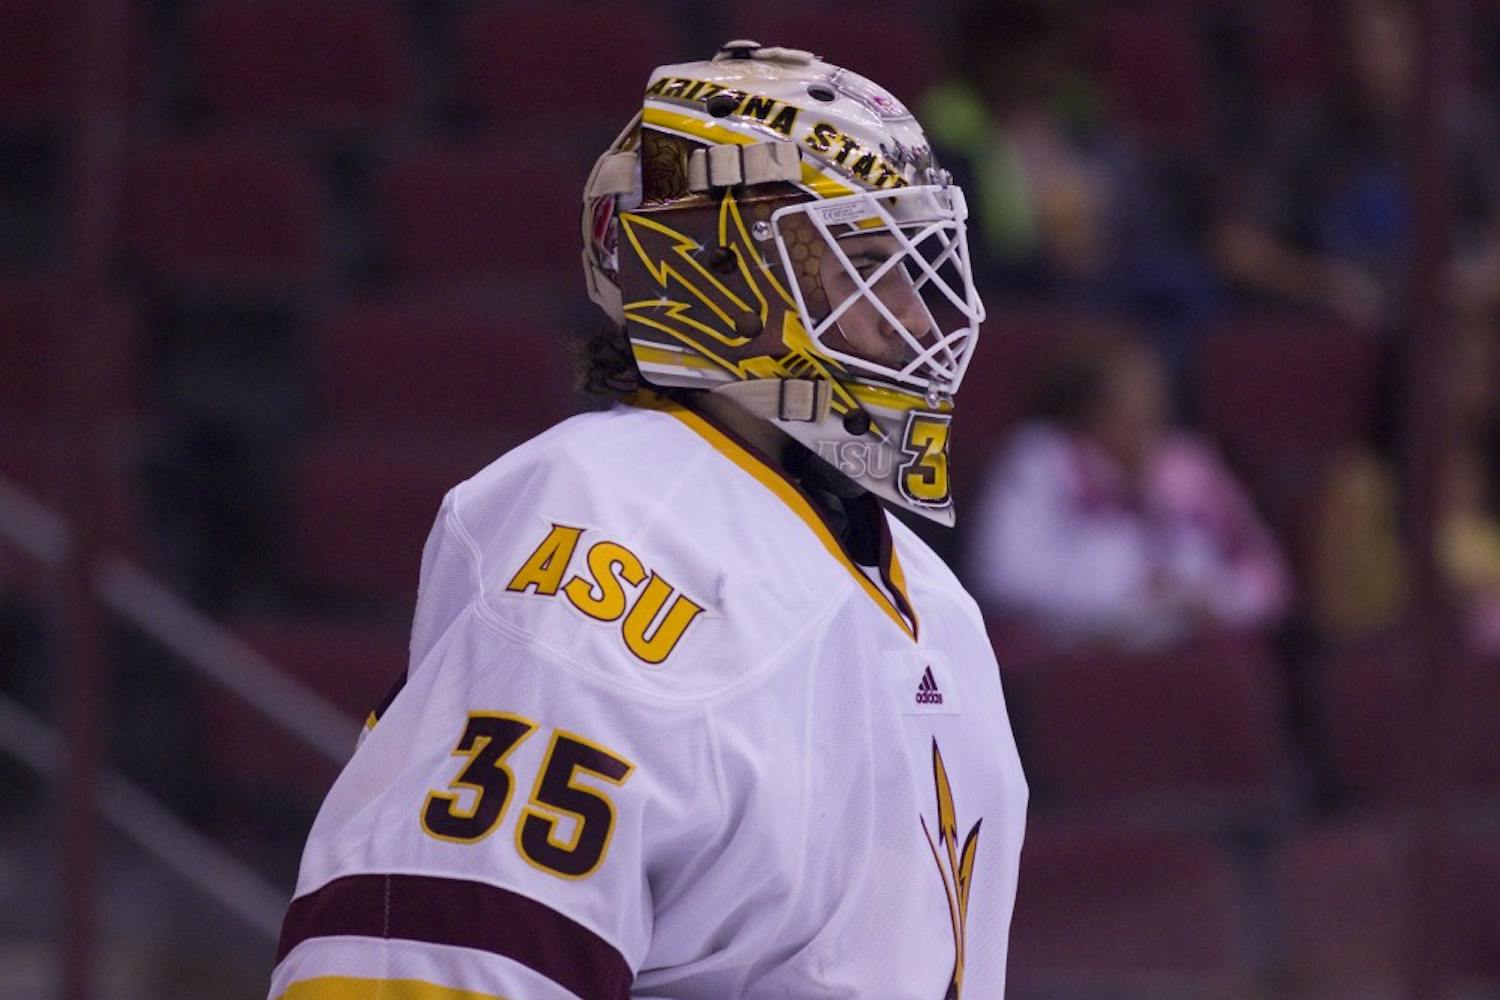 ASU freshman goaltender Joey Daccord (35) looks on to the rest of the ice during the second period of a 5-2 victory against Air Force in Gila River Arena in Glendale, Arizona, on Sunday, Oct. 16, 2016.